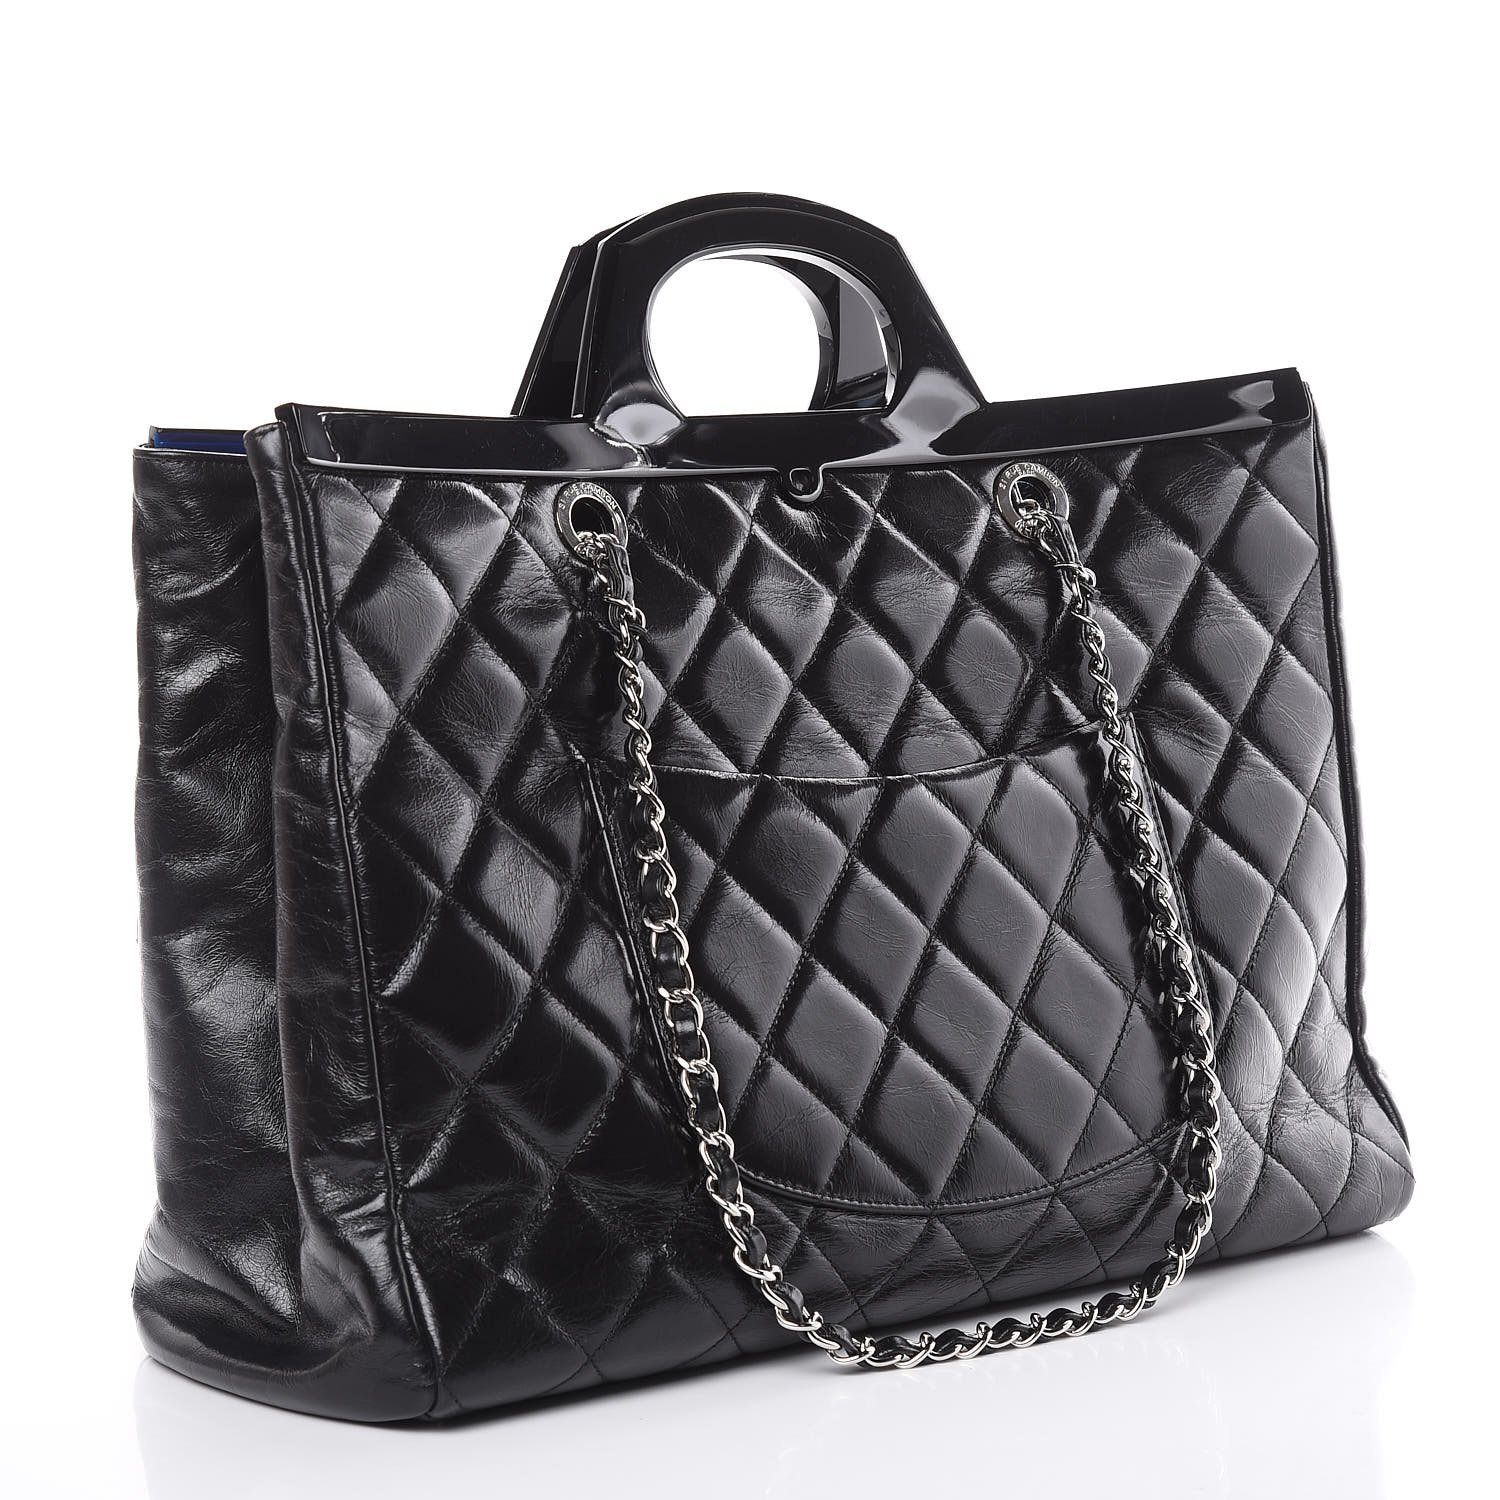 CHANEL Glazed Calfskin Quilted Large CC Delivery Tote Black 452236